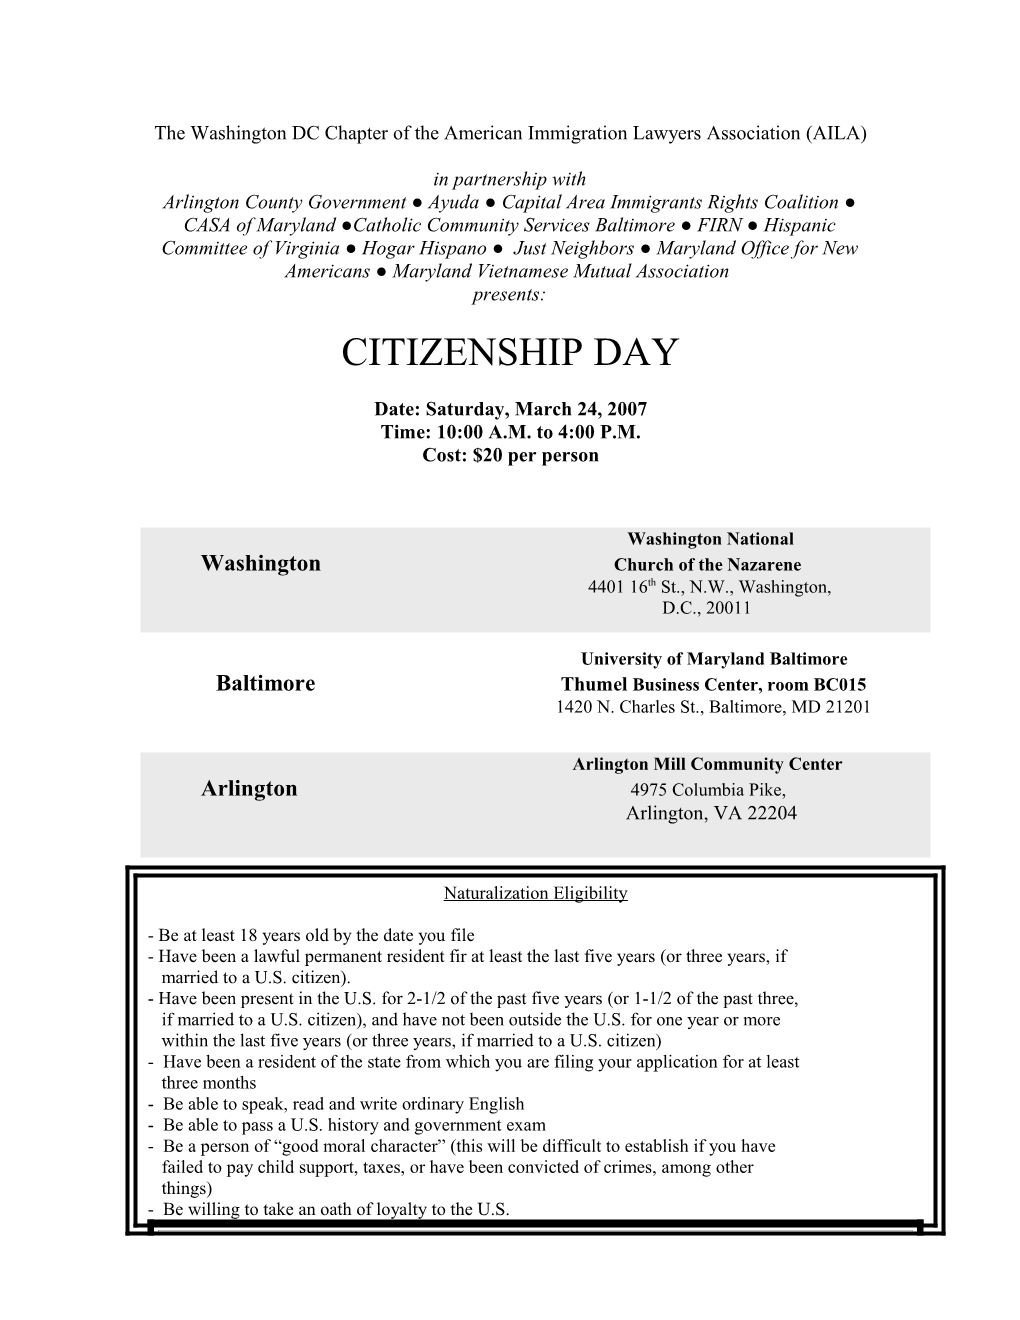 What to Bring to Naturalization Day